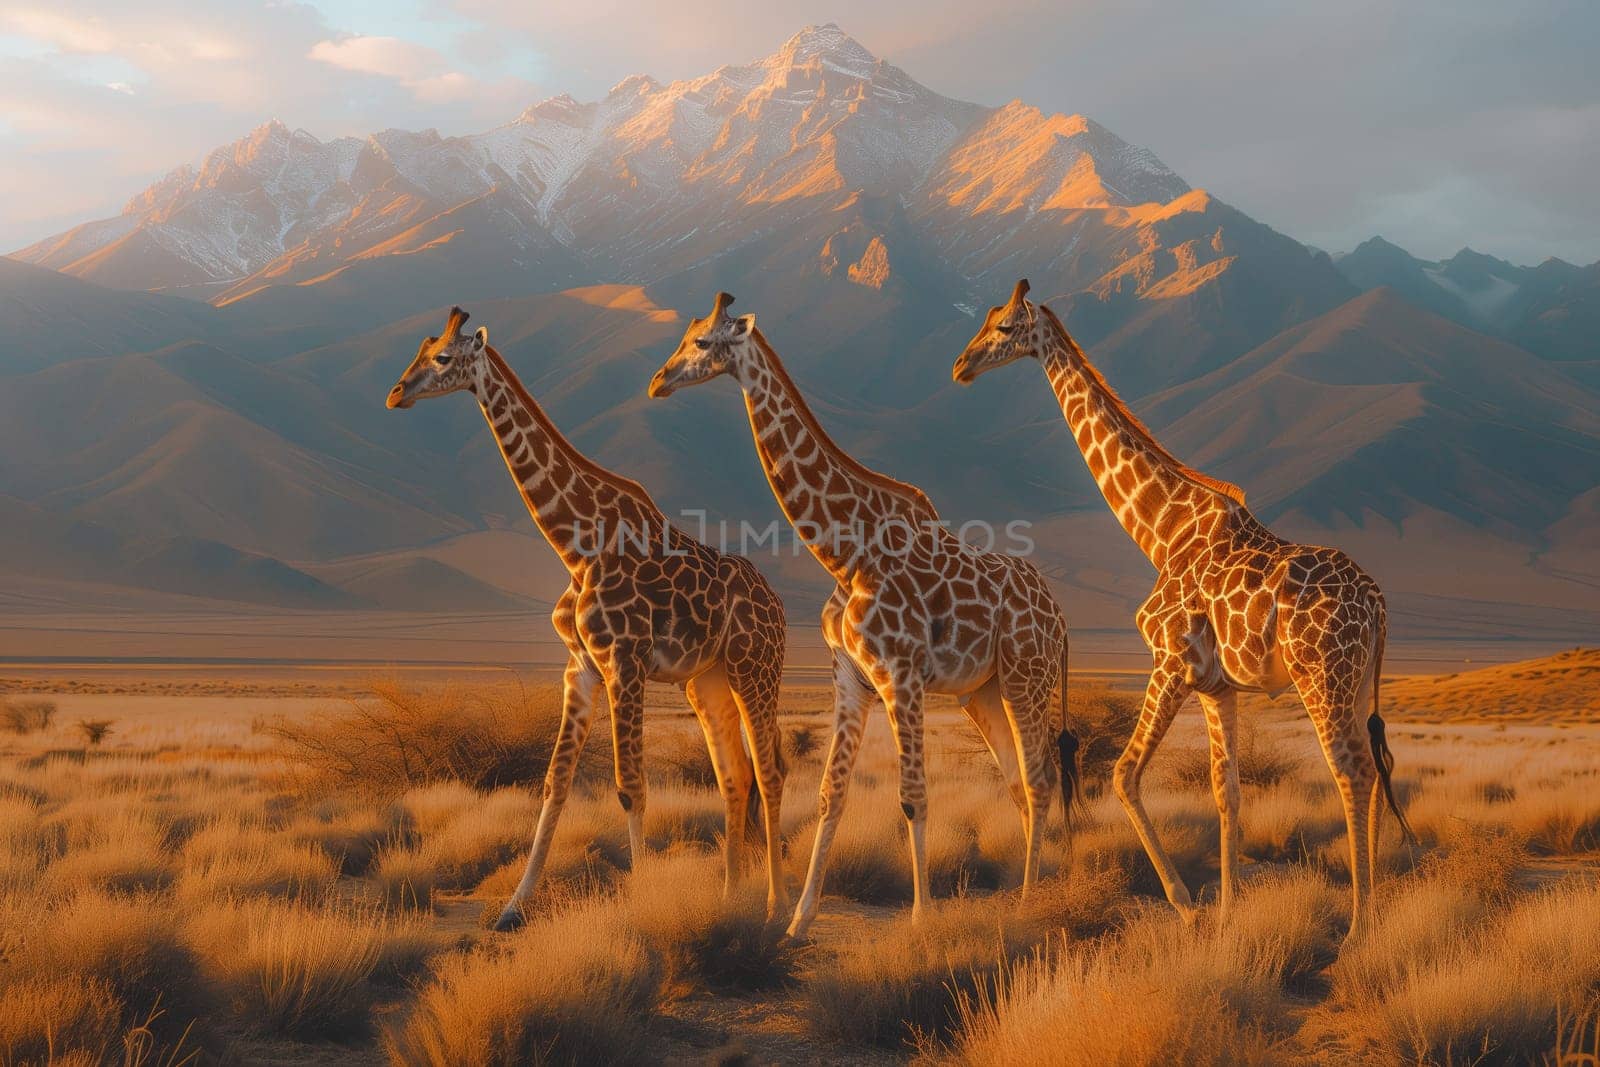 Three Giraffidae standing in a plant community with mountains in the background. Their adaptation to their terrestrial environment is evident as they graze under the sky filled with clouds